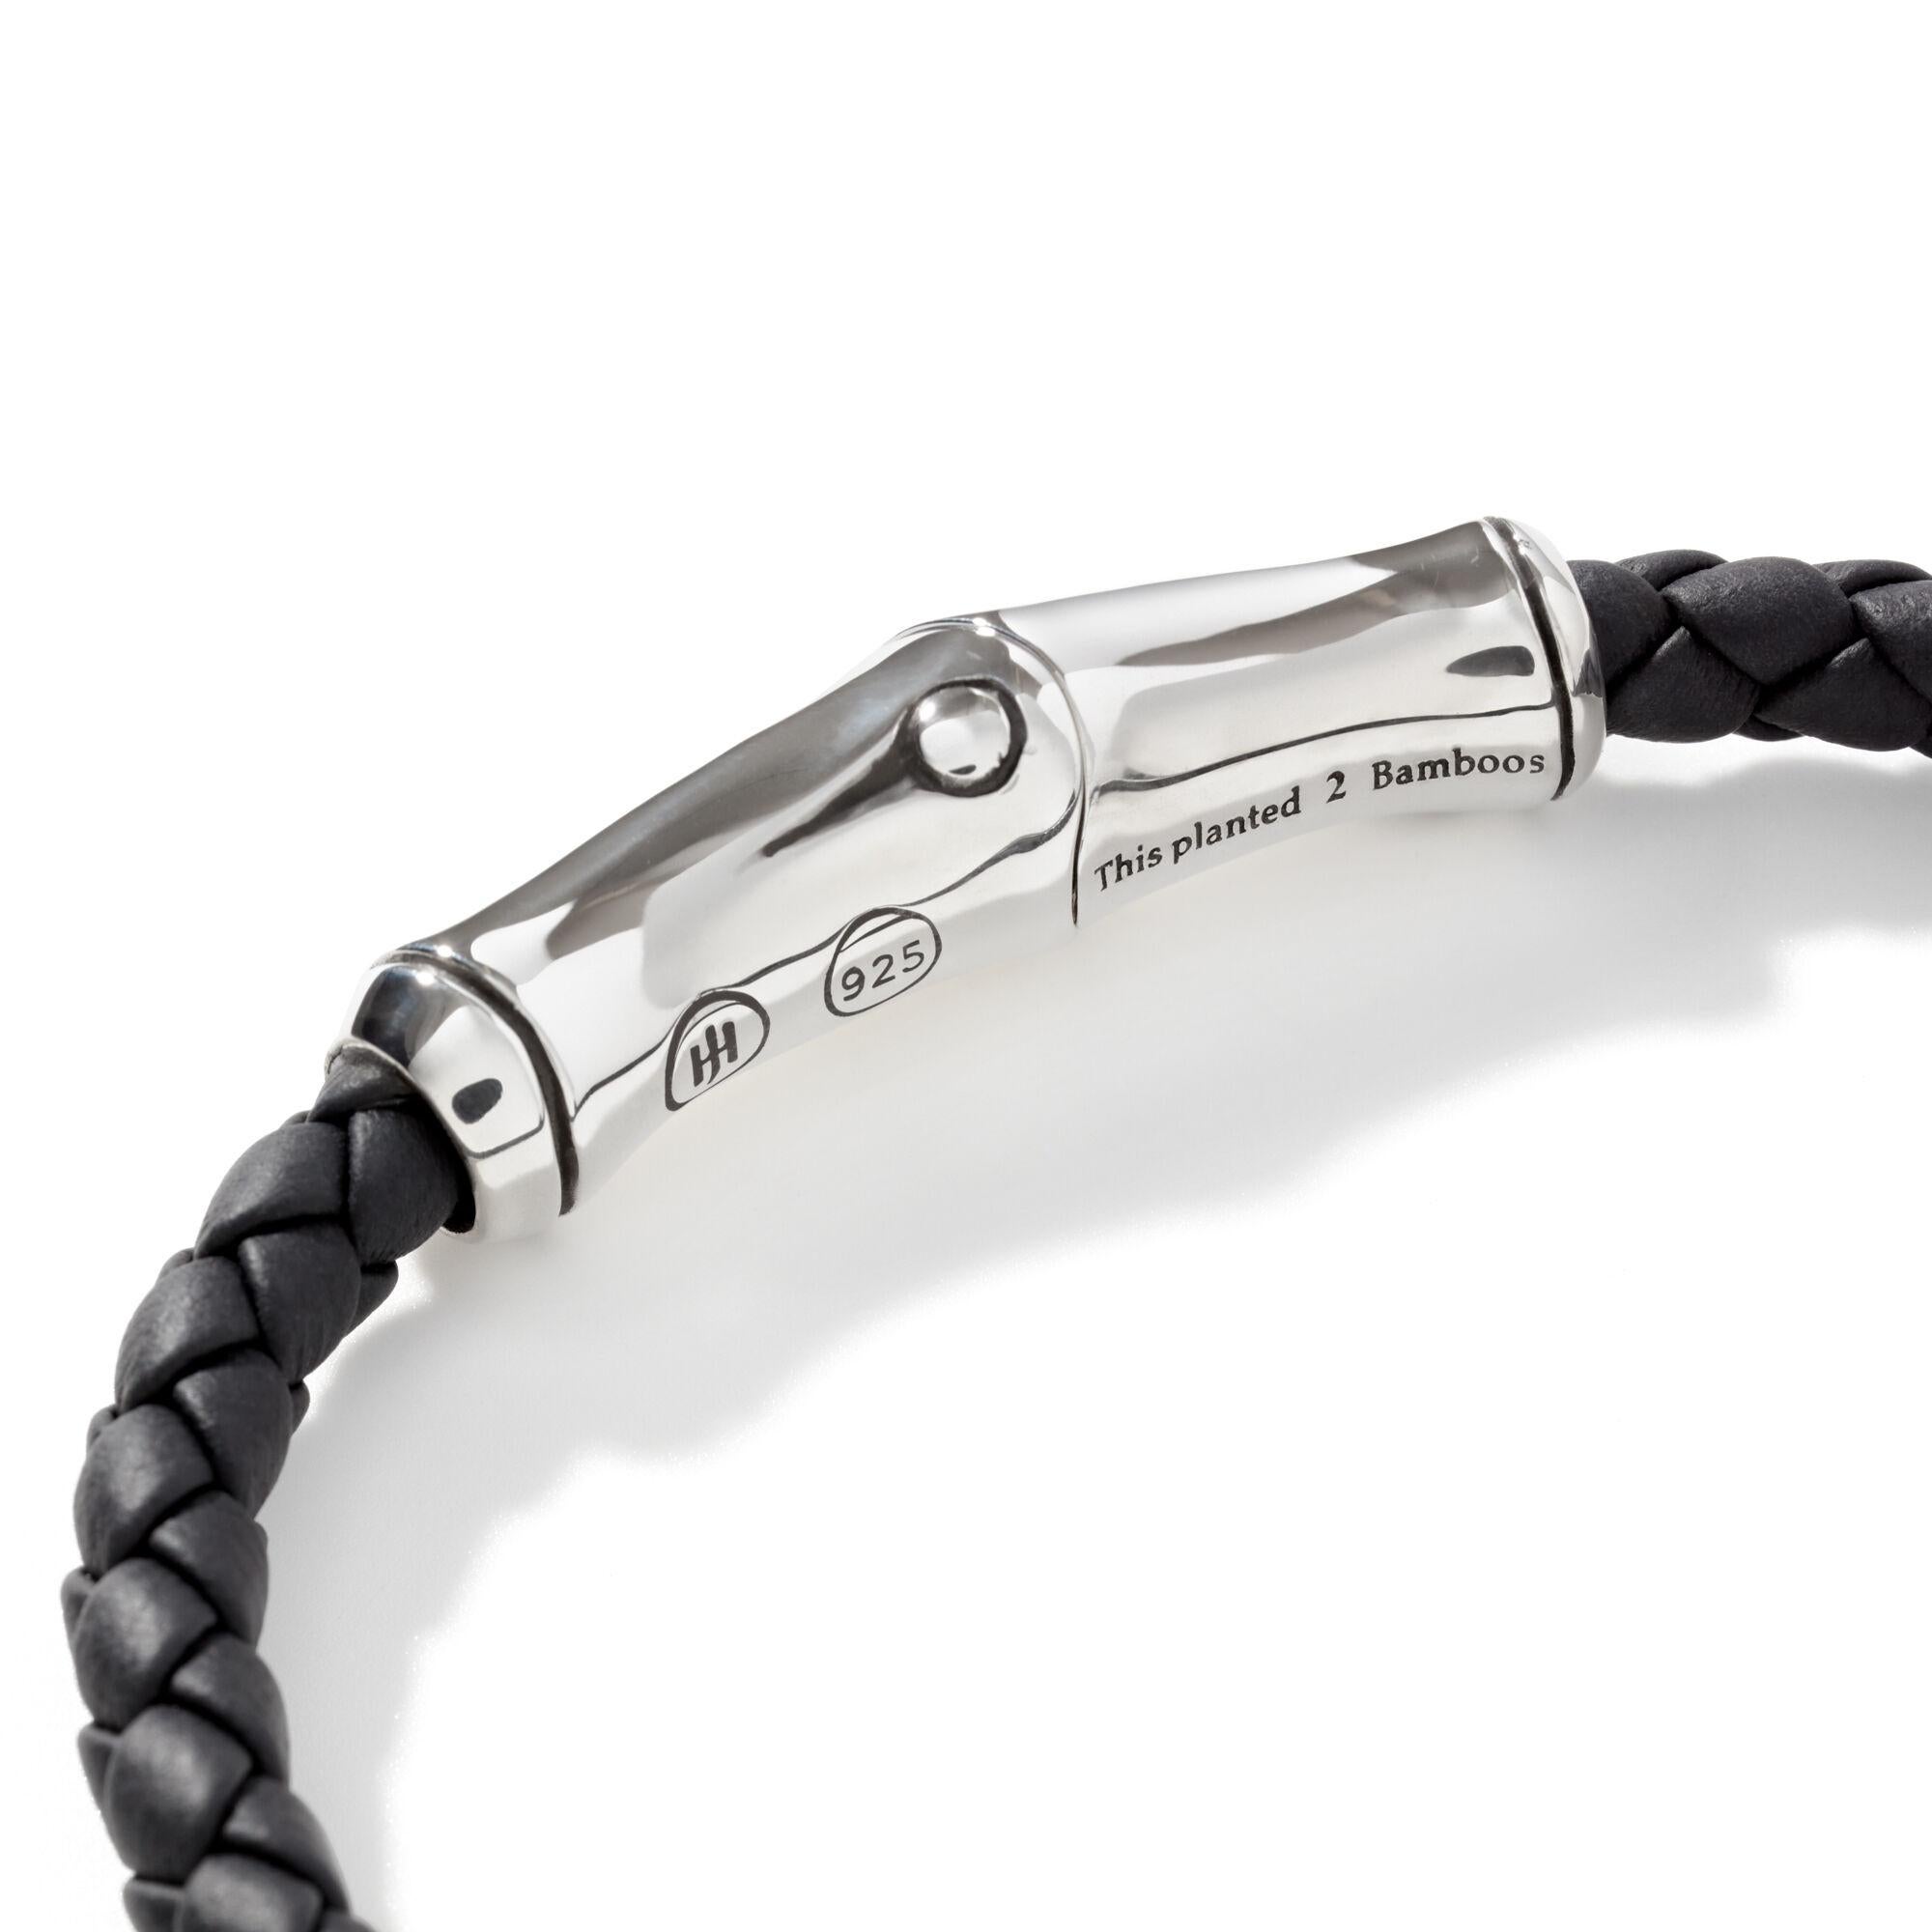 MEN's Bamboo Silver Bracelet on 5mm Black Braided Leather with Magnetic Clasp, Size Medium

